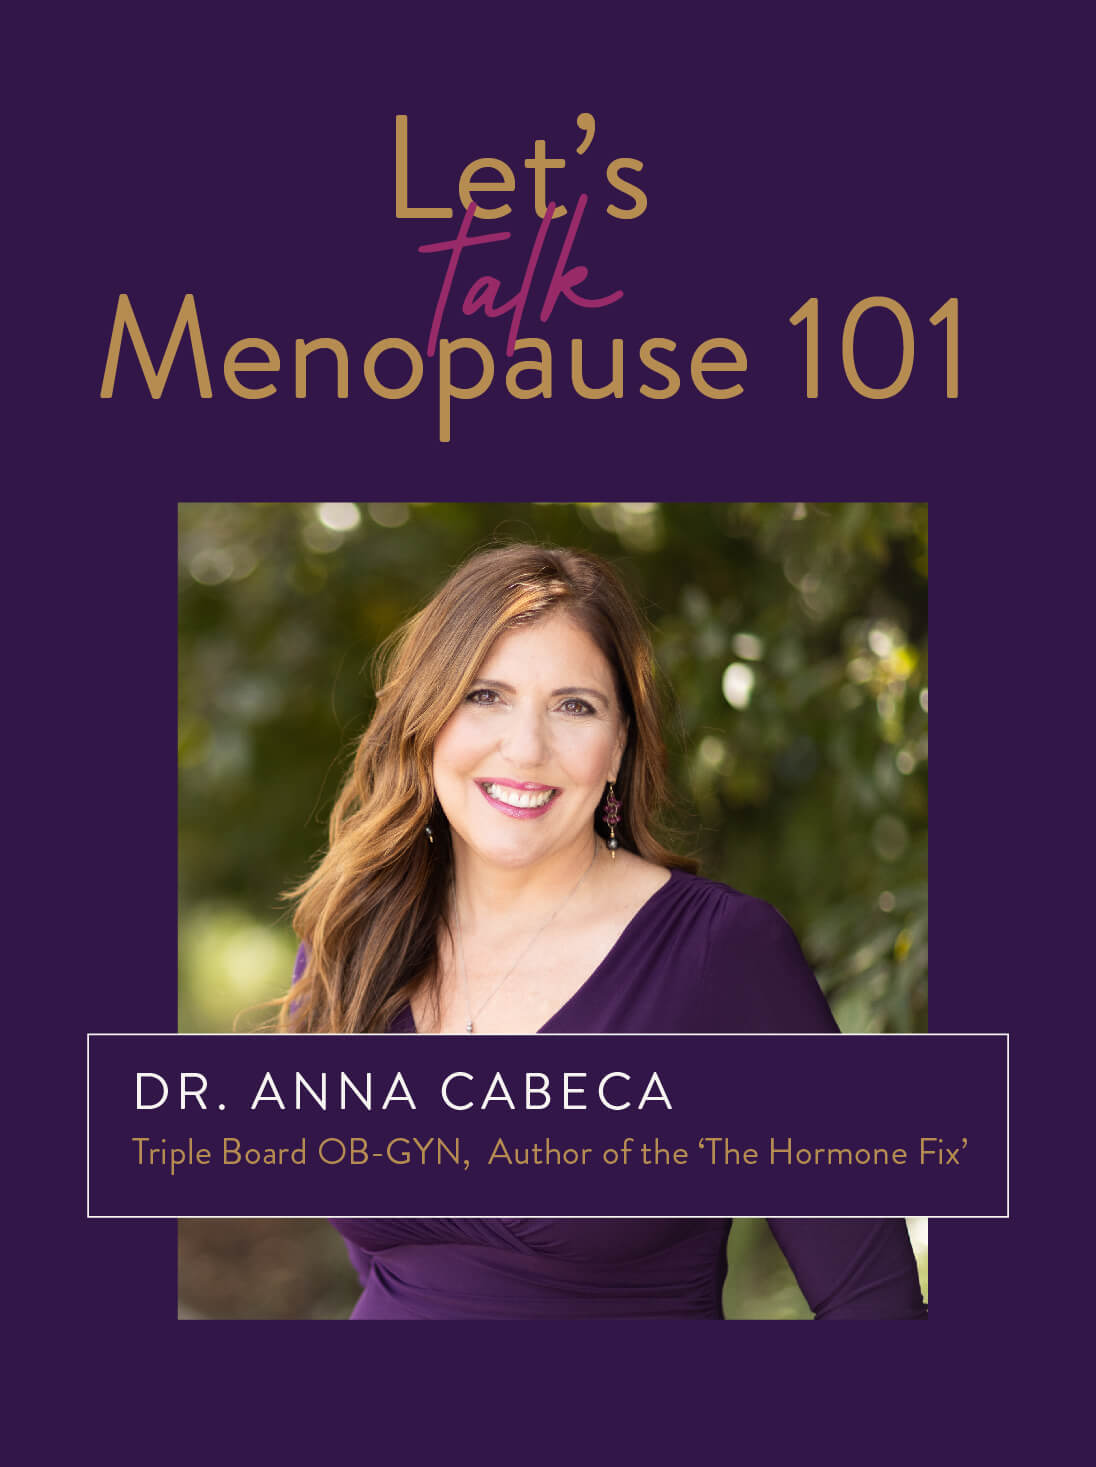 Let's Talk Menopause 101. Dr. Anna Cabeca, Triple Board OB-GYN, Author of "The Hormone Fix"